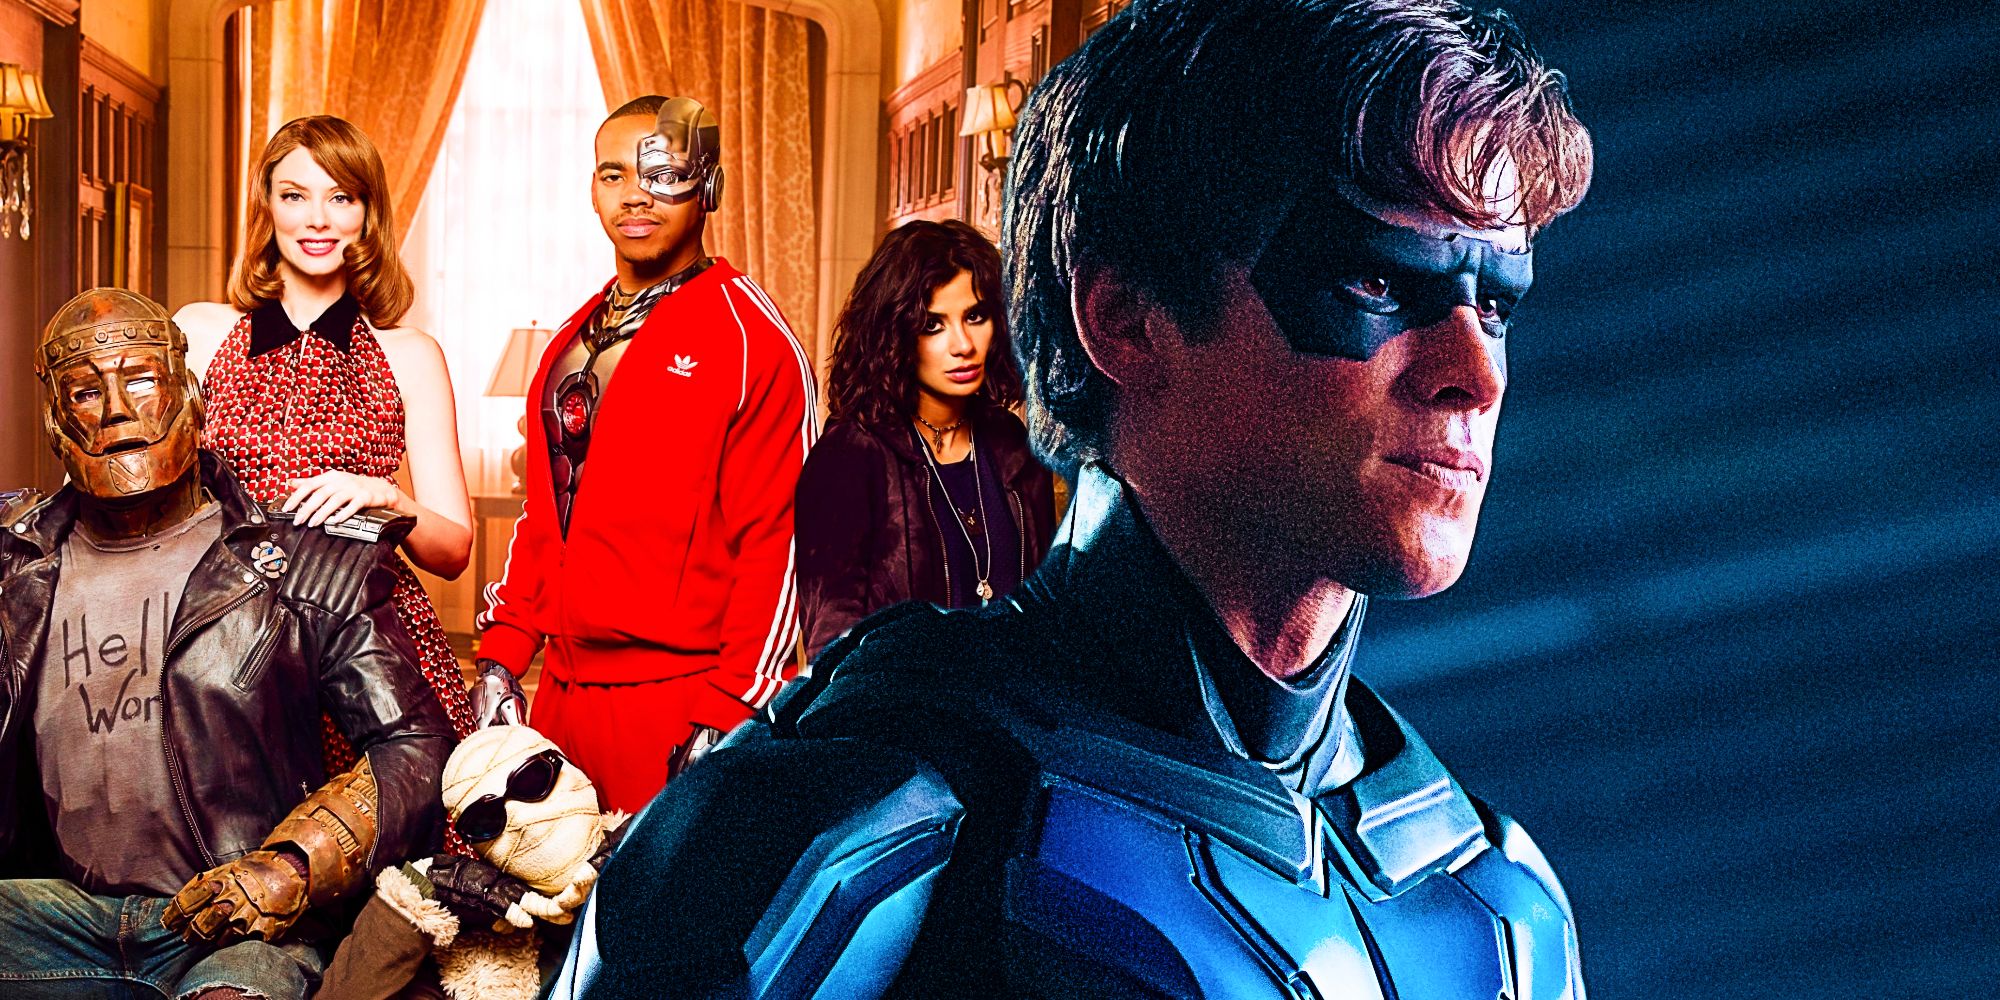 The Doom Patrol and Titans' Nightwing